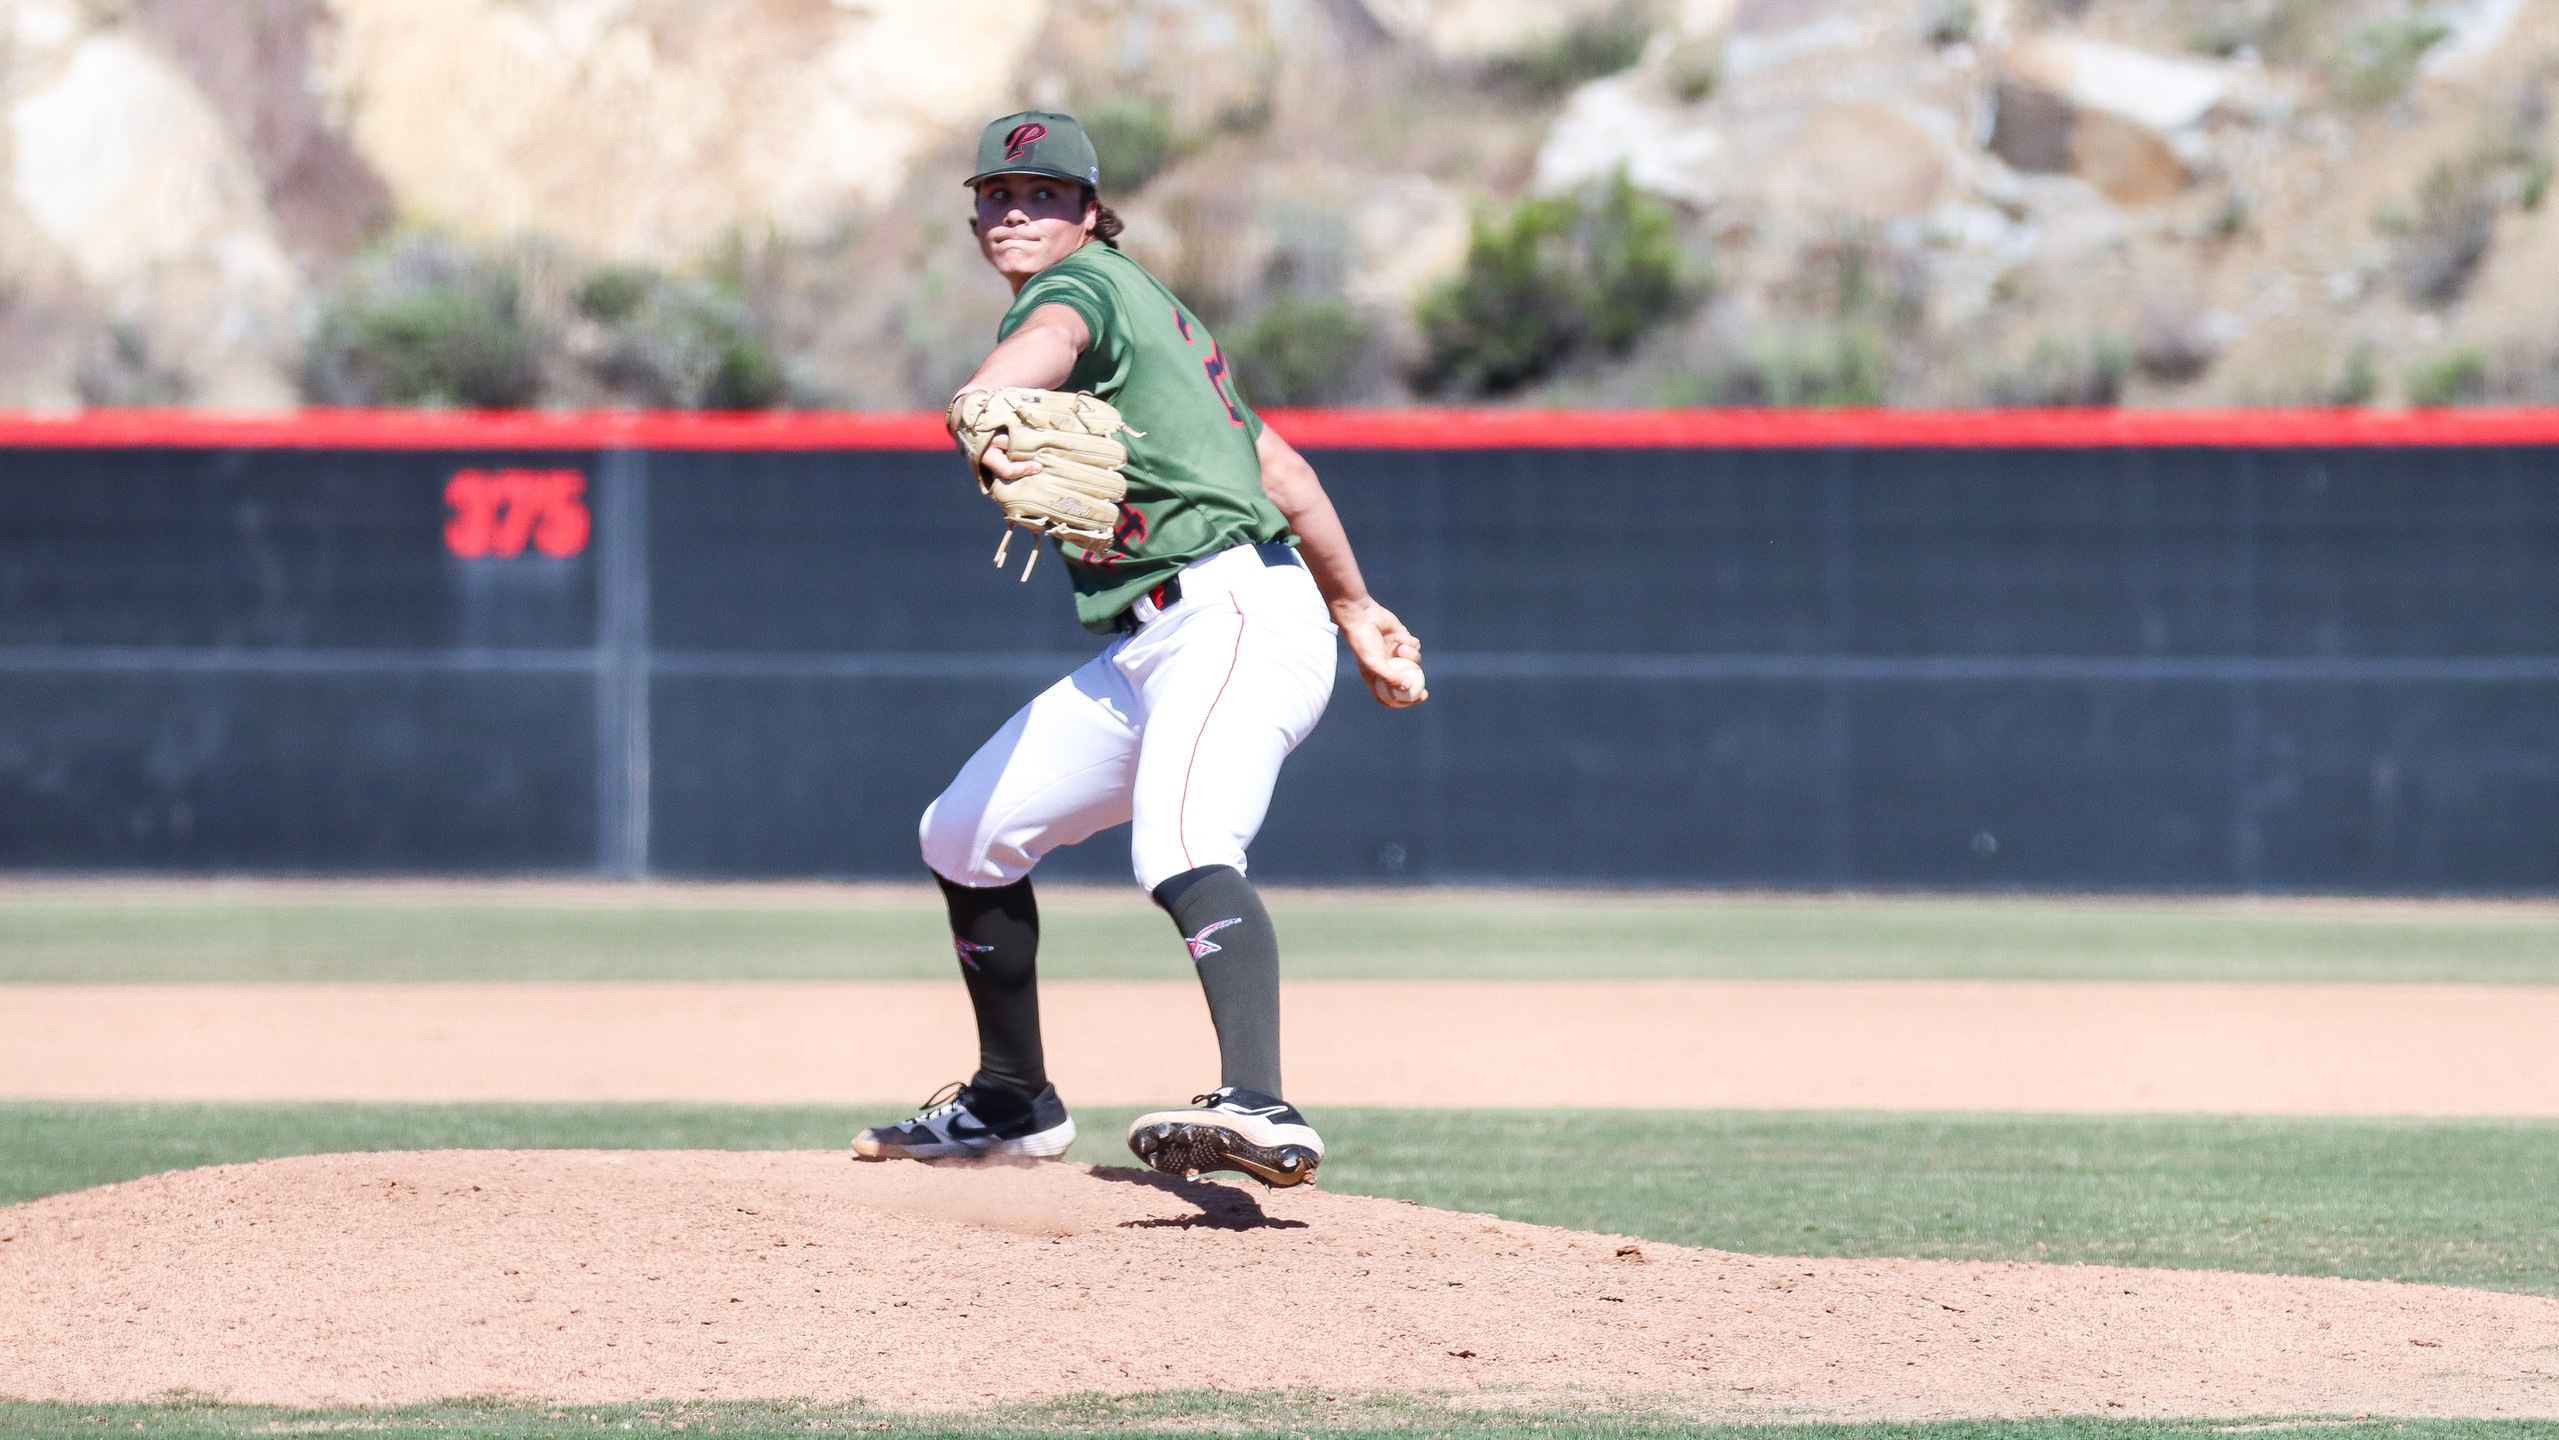 Noah Waldeck pitched 3.0 innings of relief and did not allow a hit. Photo by Cara Heise.